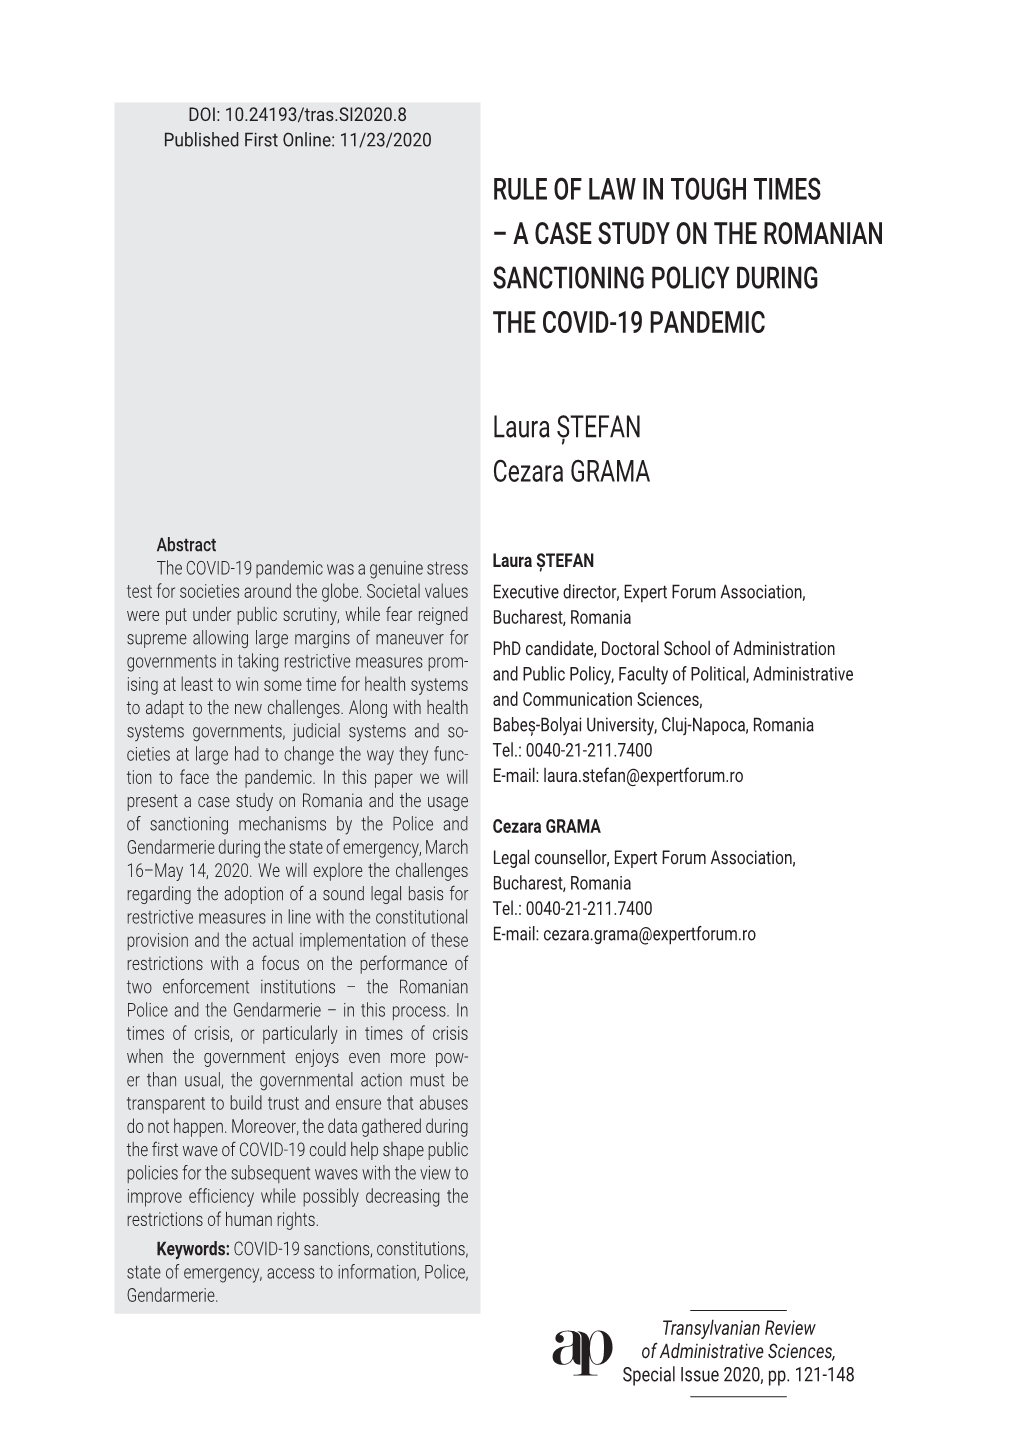 RULE of LAW in TOUGH TIMES – a CASE STUDY on the ROMANIAN SANCTIONING POLICY DURING the COVID-19 PANDEMIC Laura ȘTEFAN Cezara